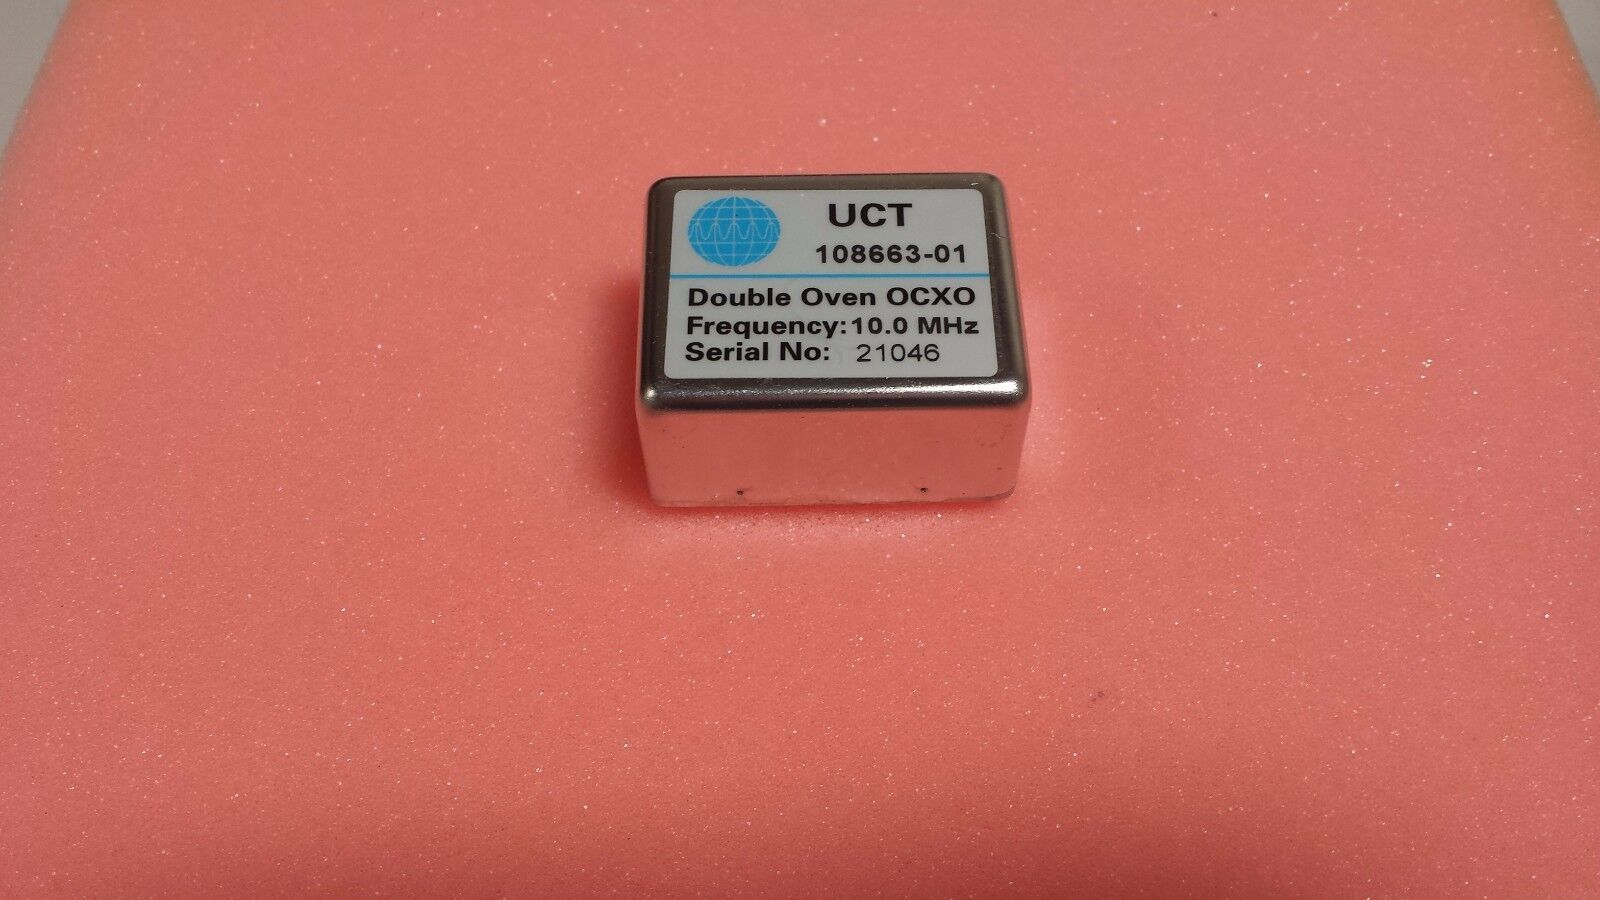 New ultra precision, high quality UCT 10 Mhz Double Oven OCXO crystal oscillator